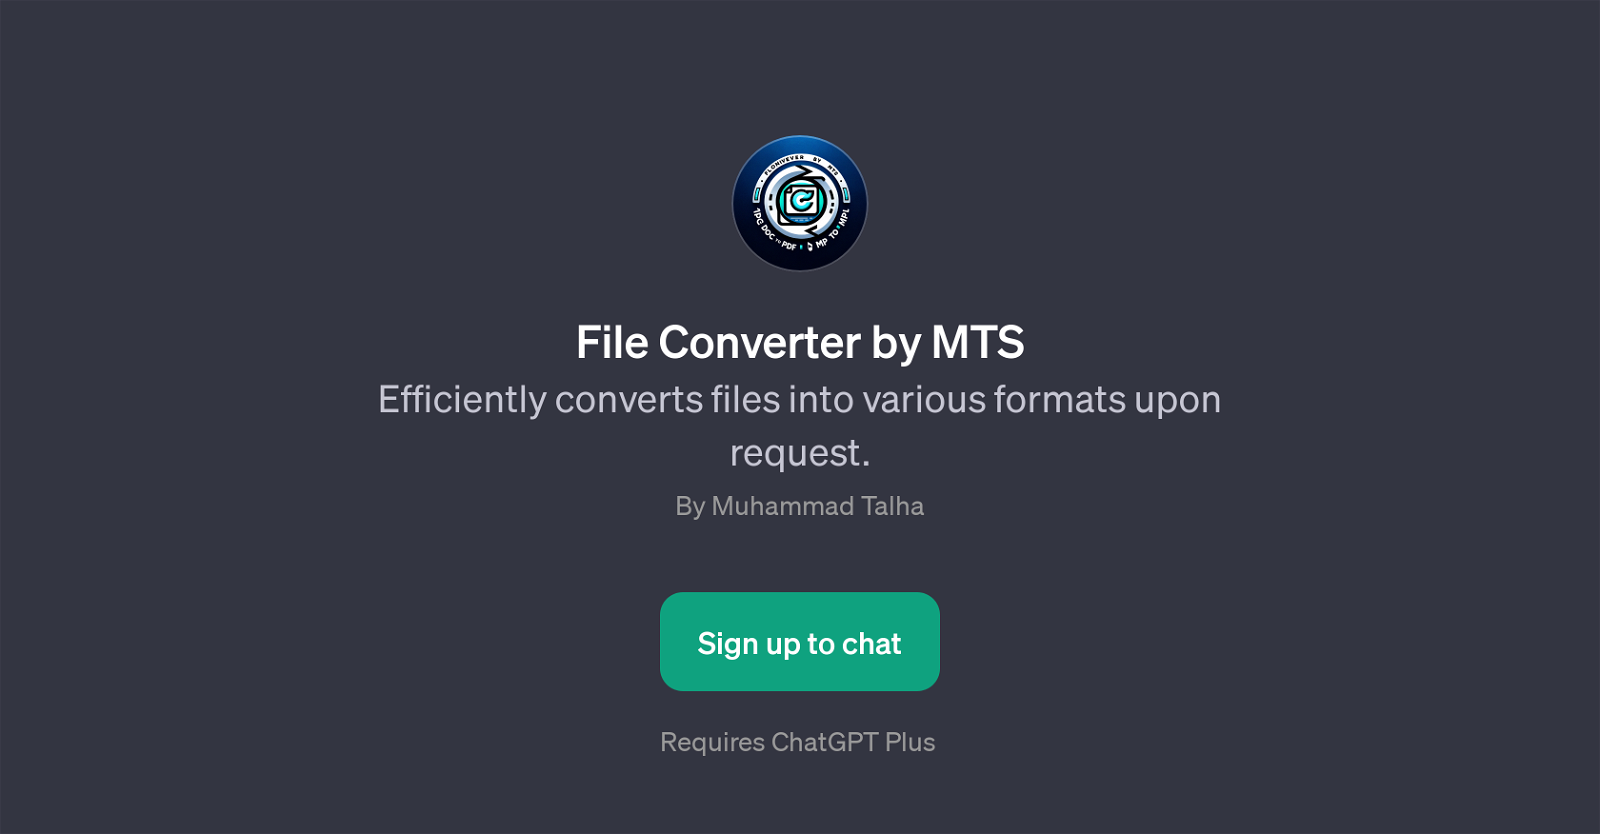 File Converter by MTS website